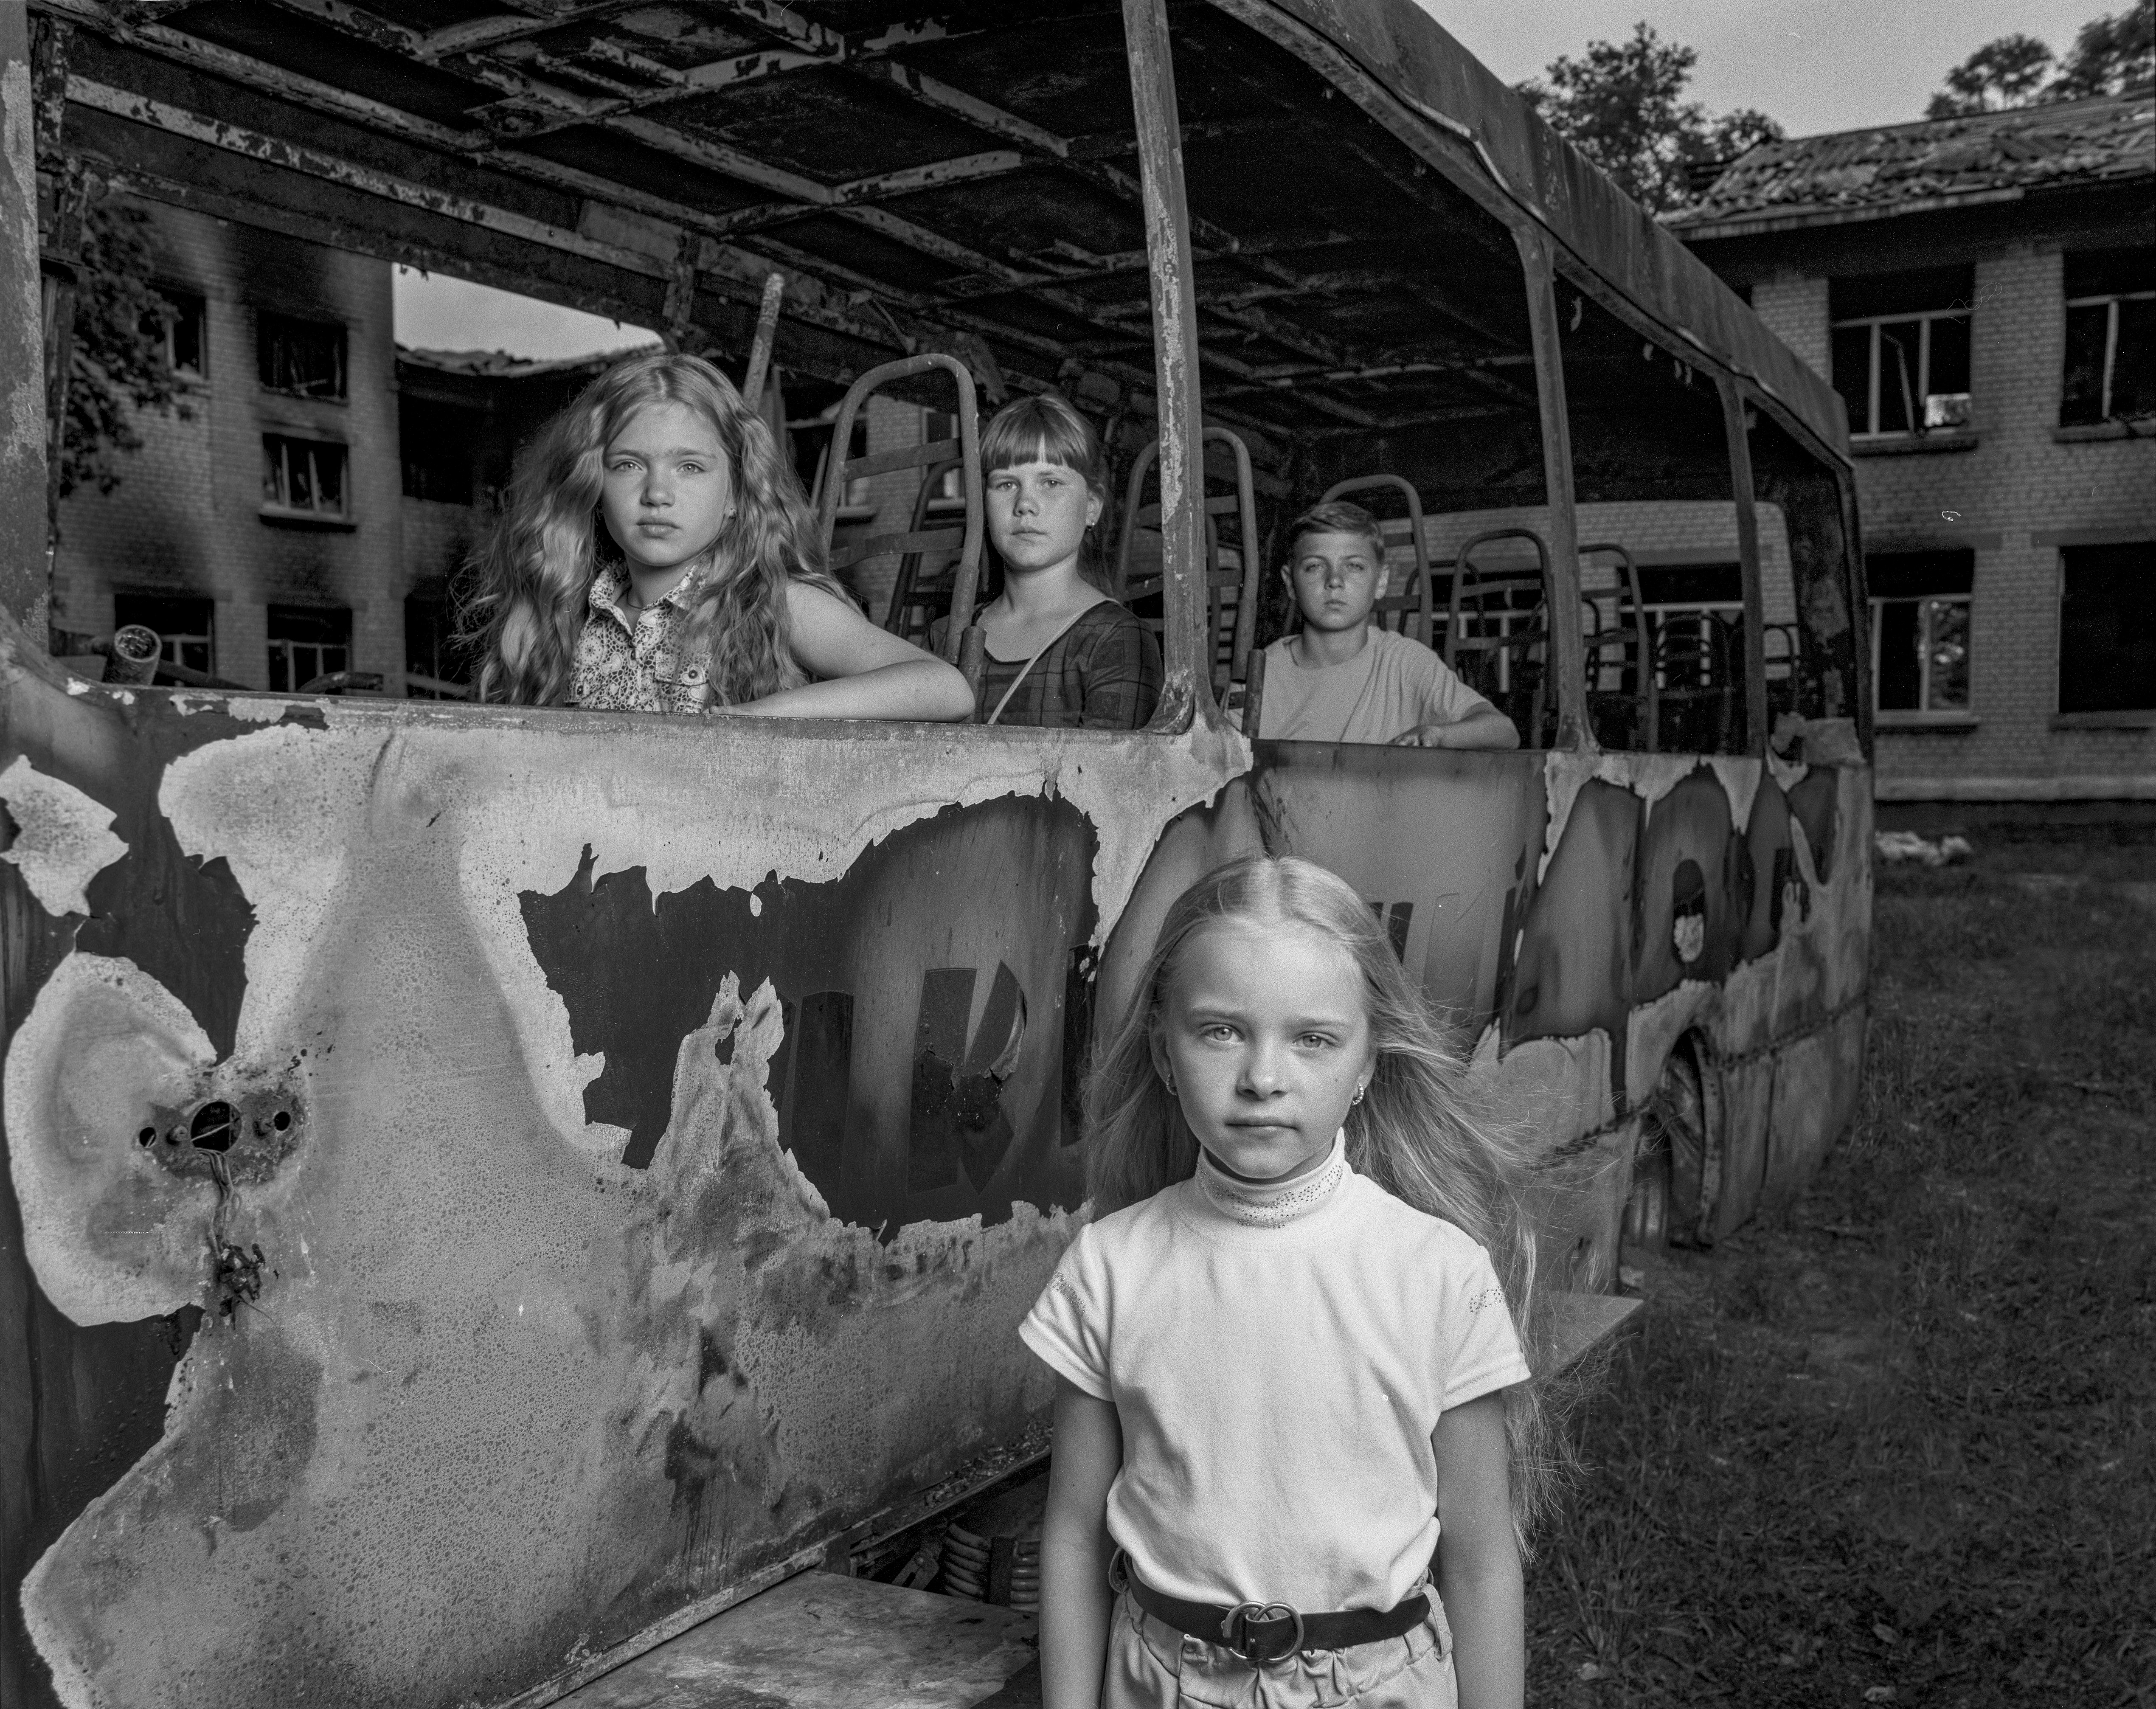 A black and white photo of children inside and near a school bus in Kyiv, Ukraine that was irreparably damaged by Russia's army.